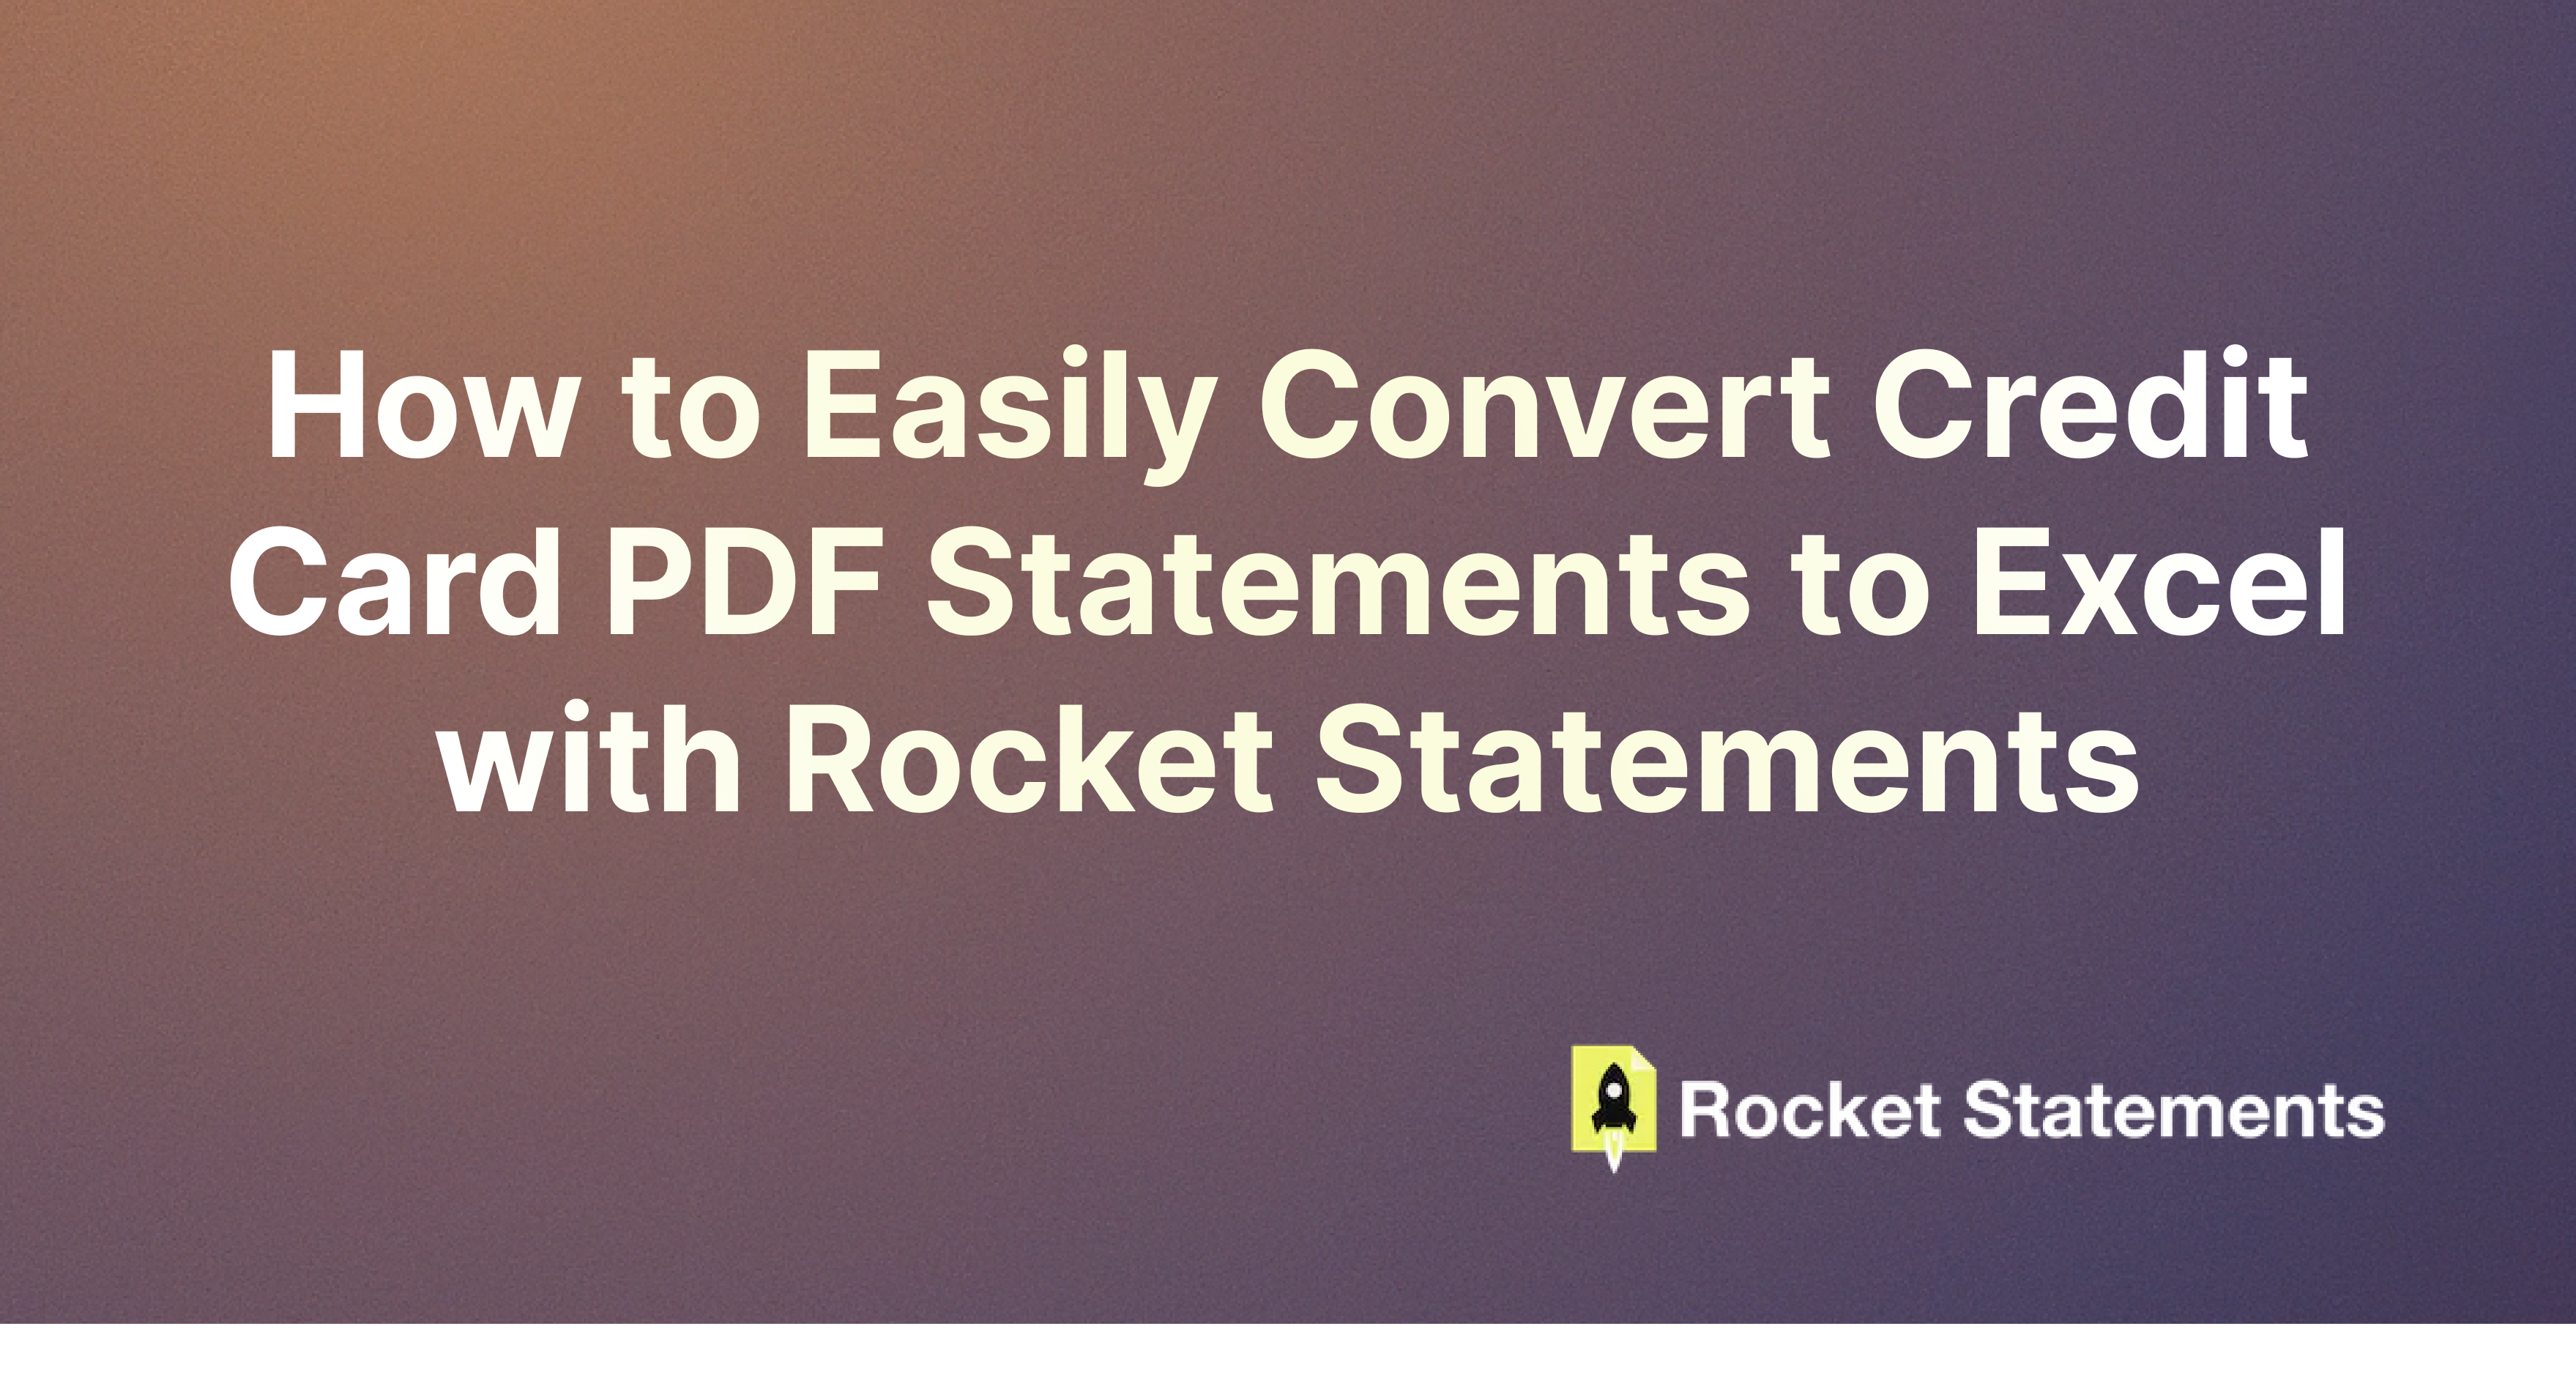 How to Easily Convert Credit Card PDF Statements to Excel with Rocket Statements